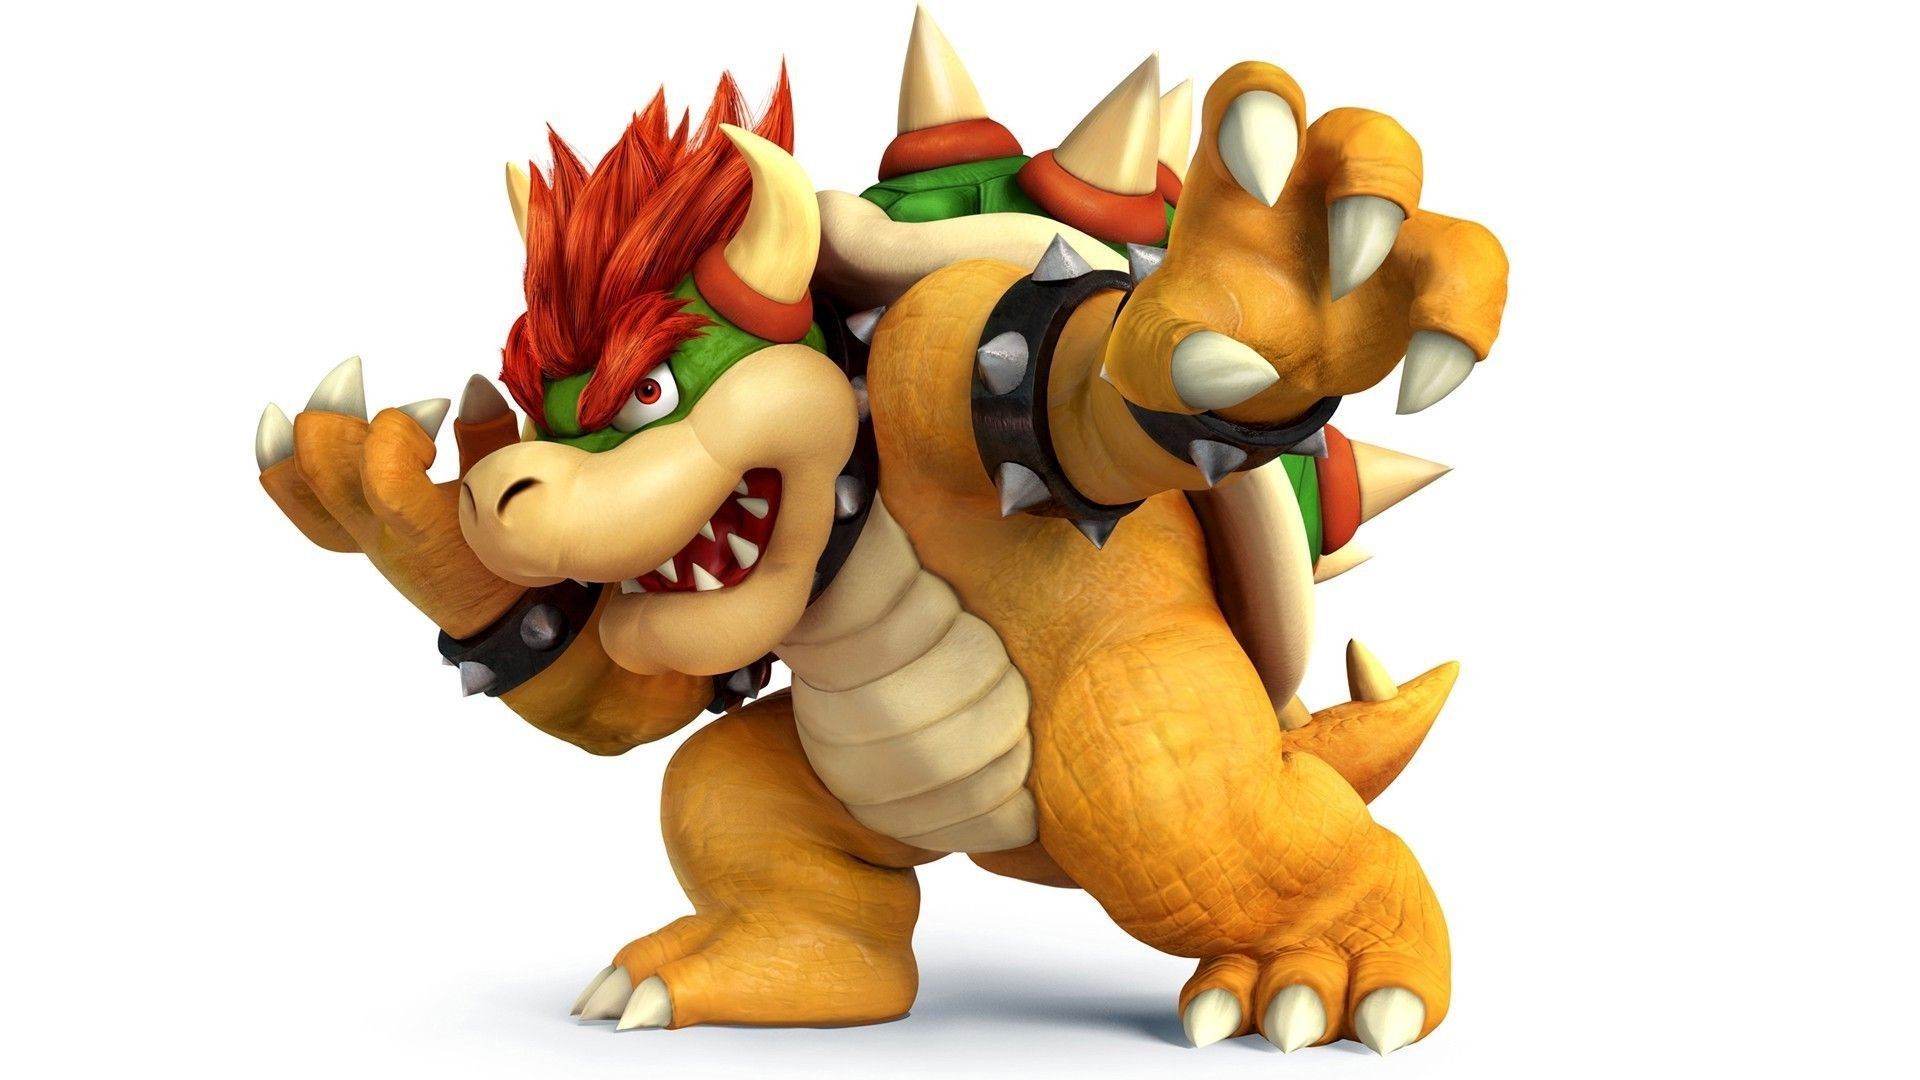 A 3D model of Bowser from the Mario franchise - Bowser